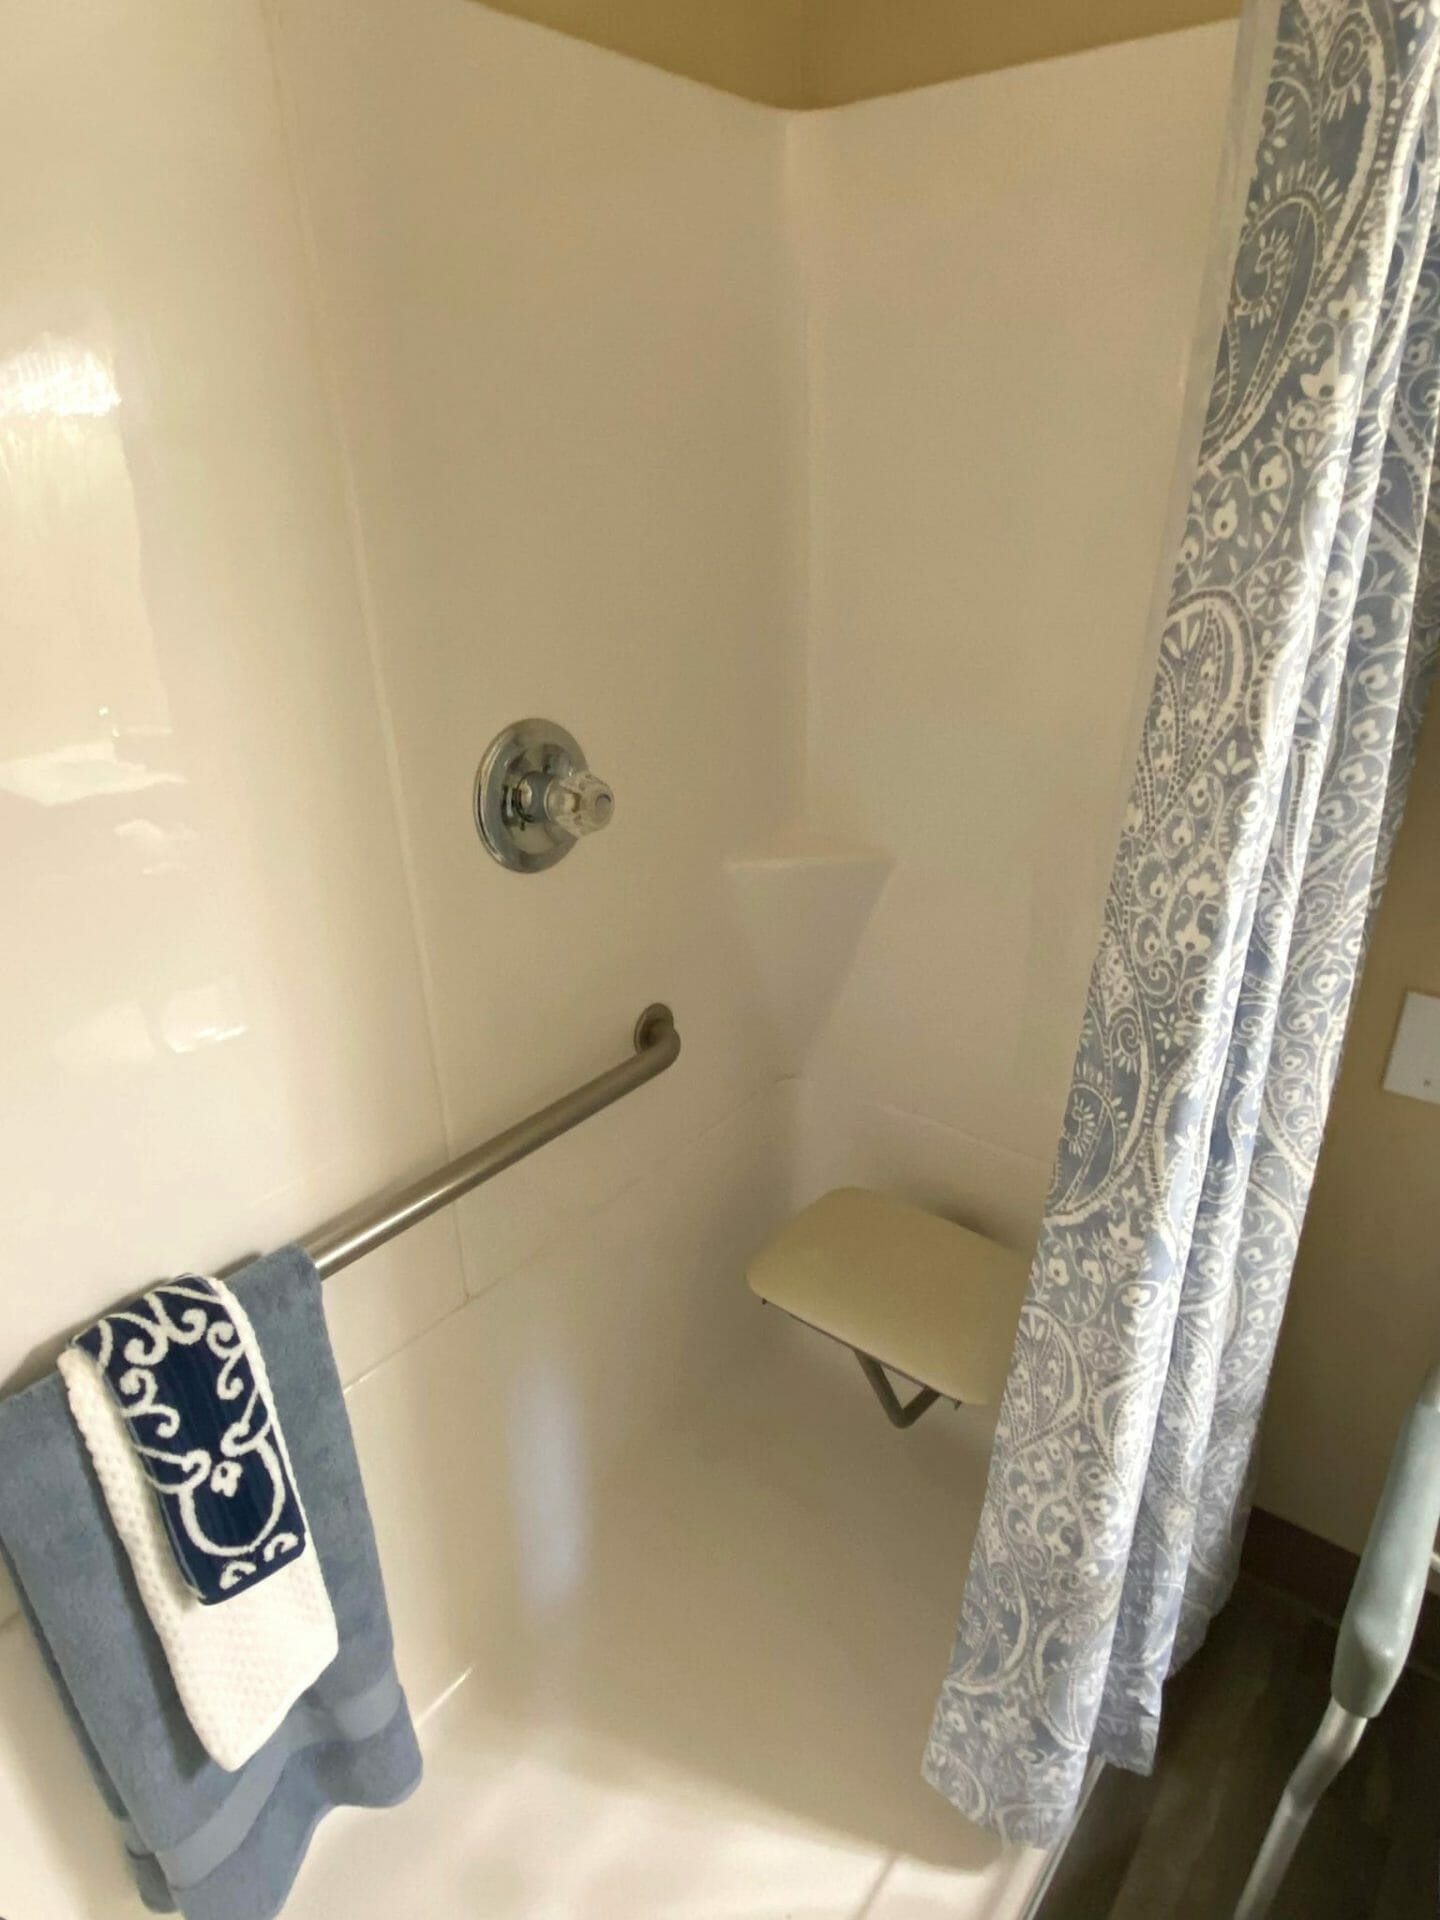 <span  class="uc_style_uc_tiles_grid_image_elementor_uc_items_attribute_title" style="color:#000000;">Shower in the American Village Lincoln Lodge. </span>